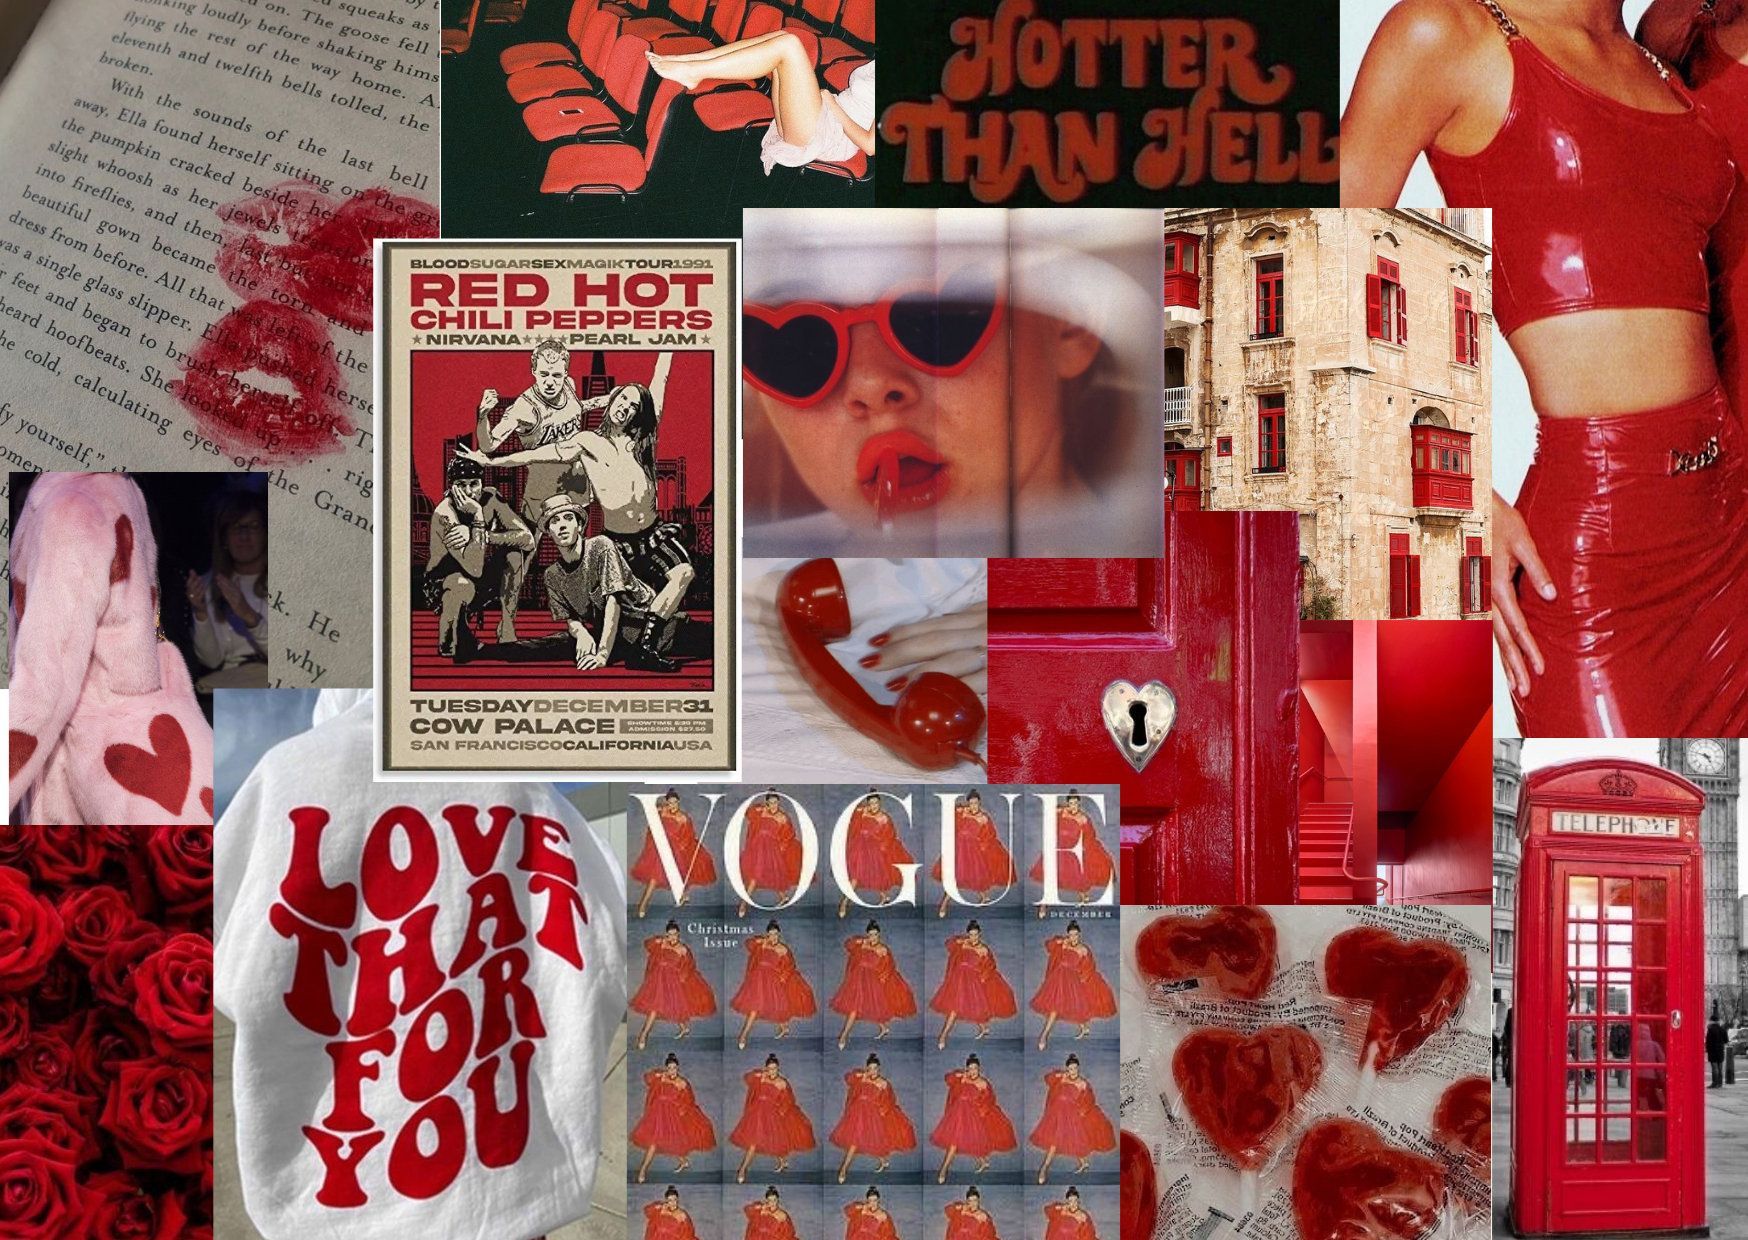 A collage of red and white images including a red hot chili peppers poster, a phone booth, and a Vogue magazine - Coquette